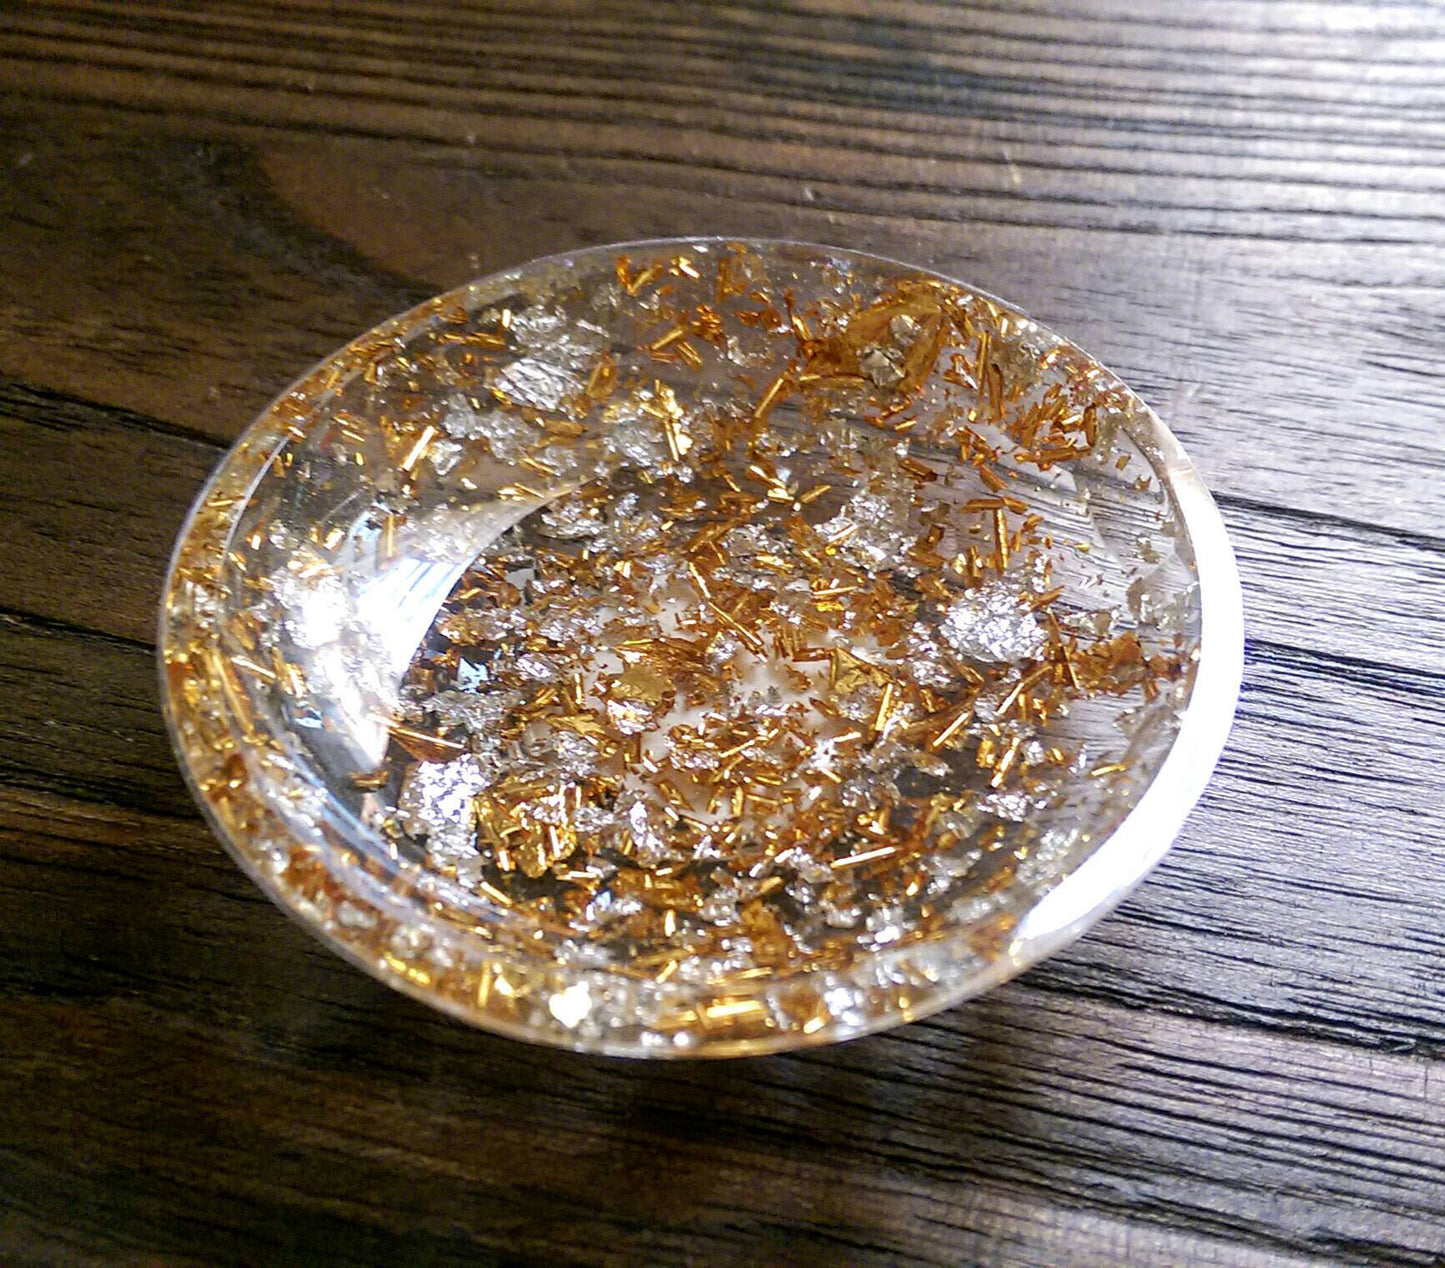 Trinket Ring Dish, Gold and Silver Leaf Ring Dish, Hand Made Resin Dish